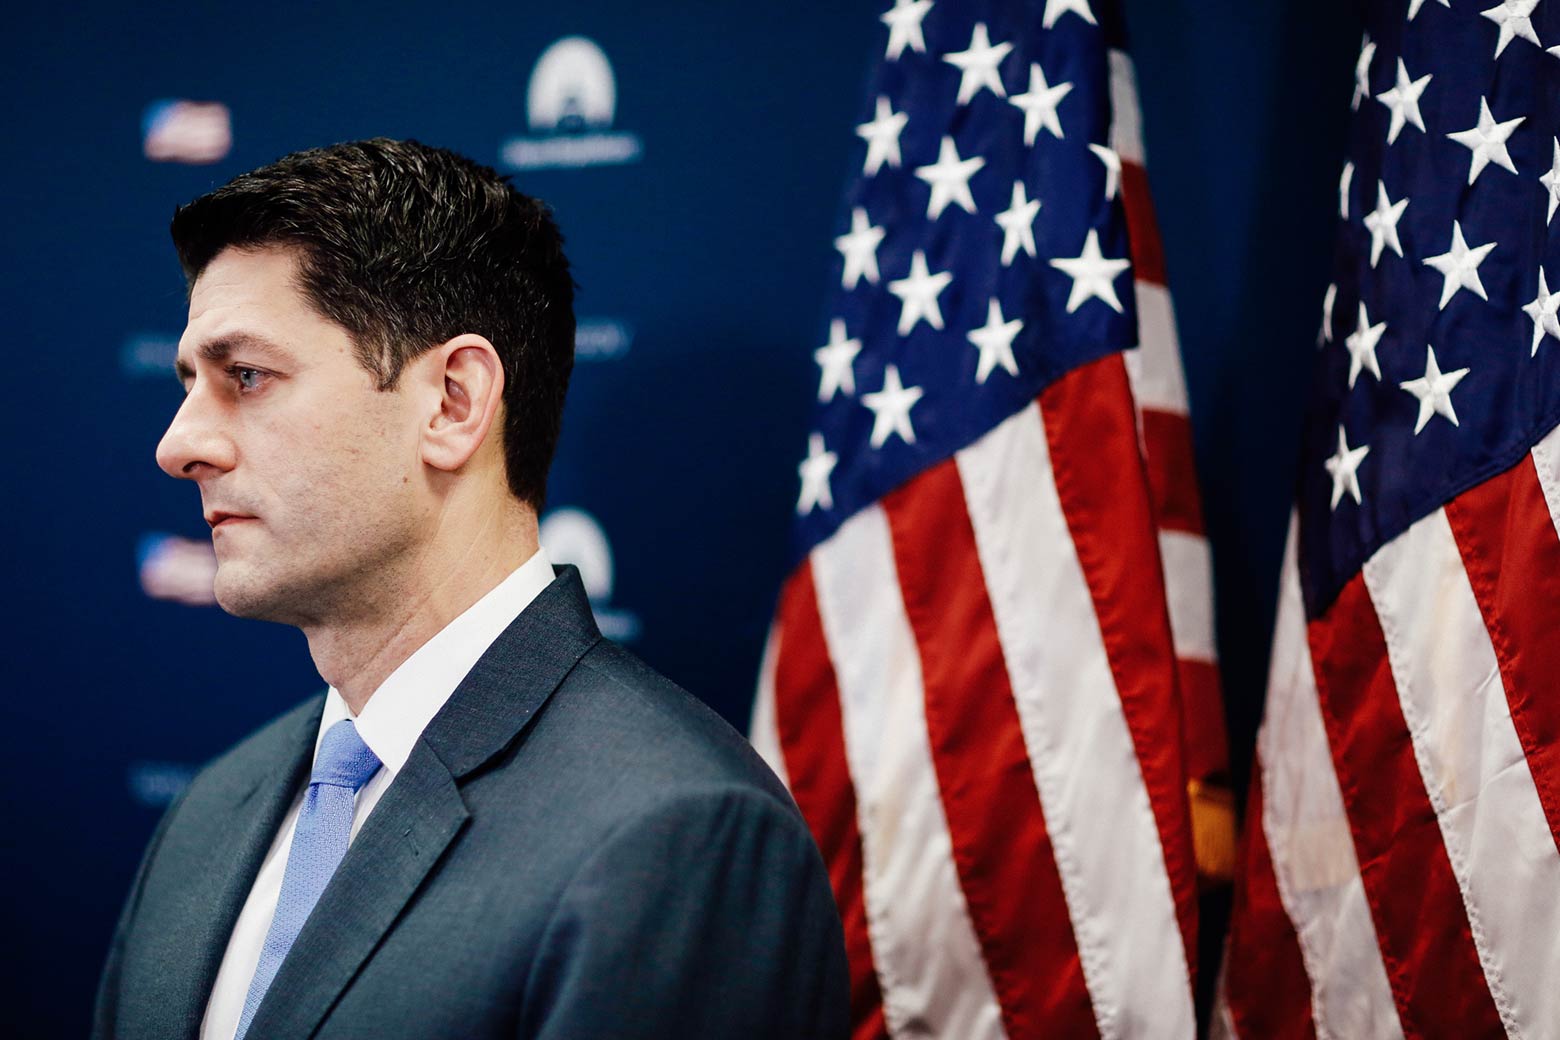 U.S. House Speaker Paul Ryan (R-WI) speaks to reporters ahead of an expected vote in the Republican-led U.S. House of Representatives on a short-term budget measure that would avert a rerun of last month's three-day partial government shutdown, on Capitol Hill in Washington, U.S., February 6, 2018. 